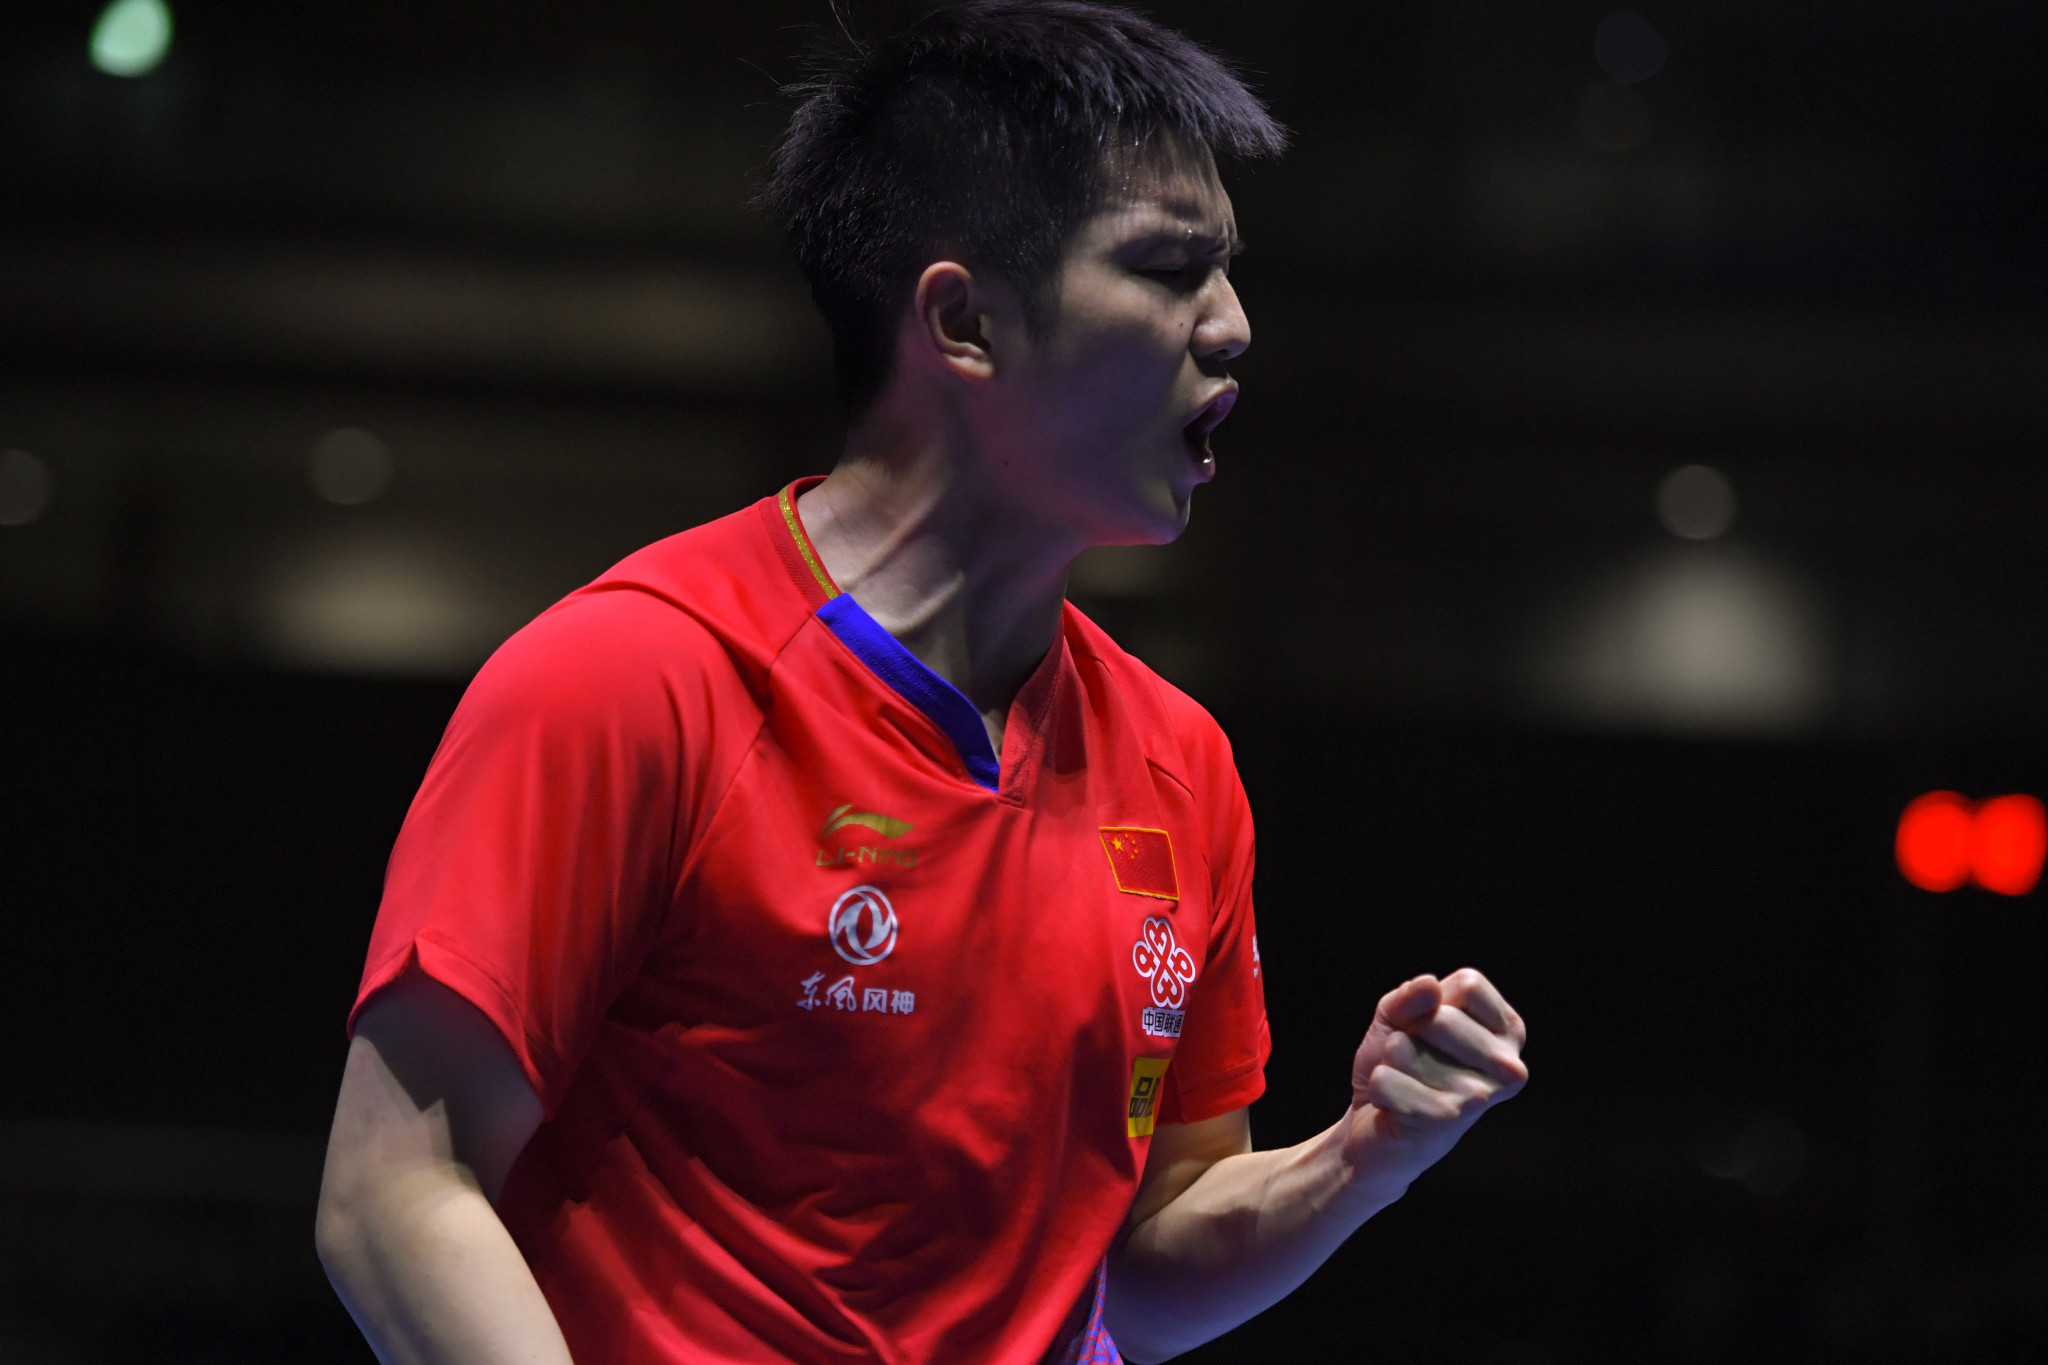 Fan beats Harimoto to defend title at ITTF Men's World Cup